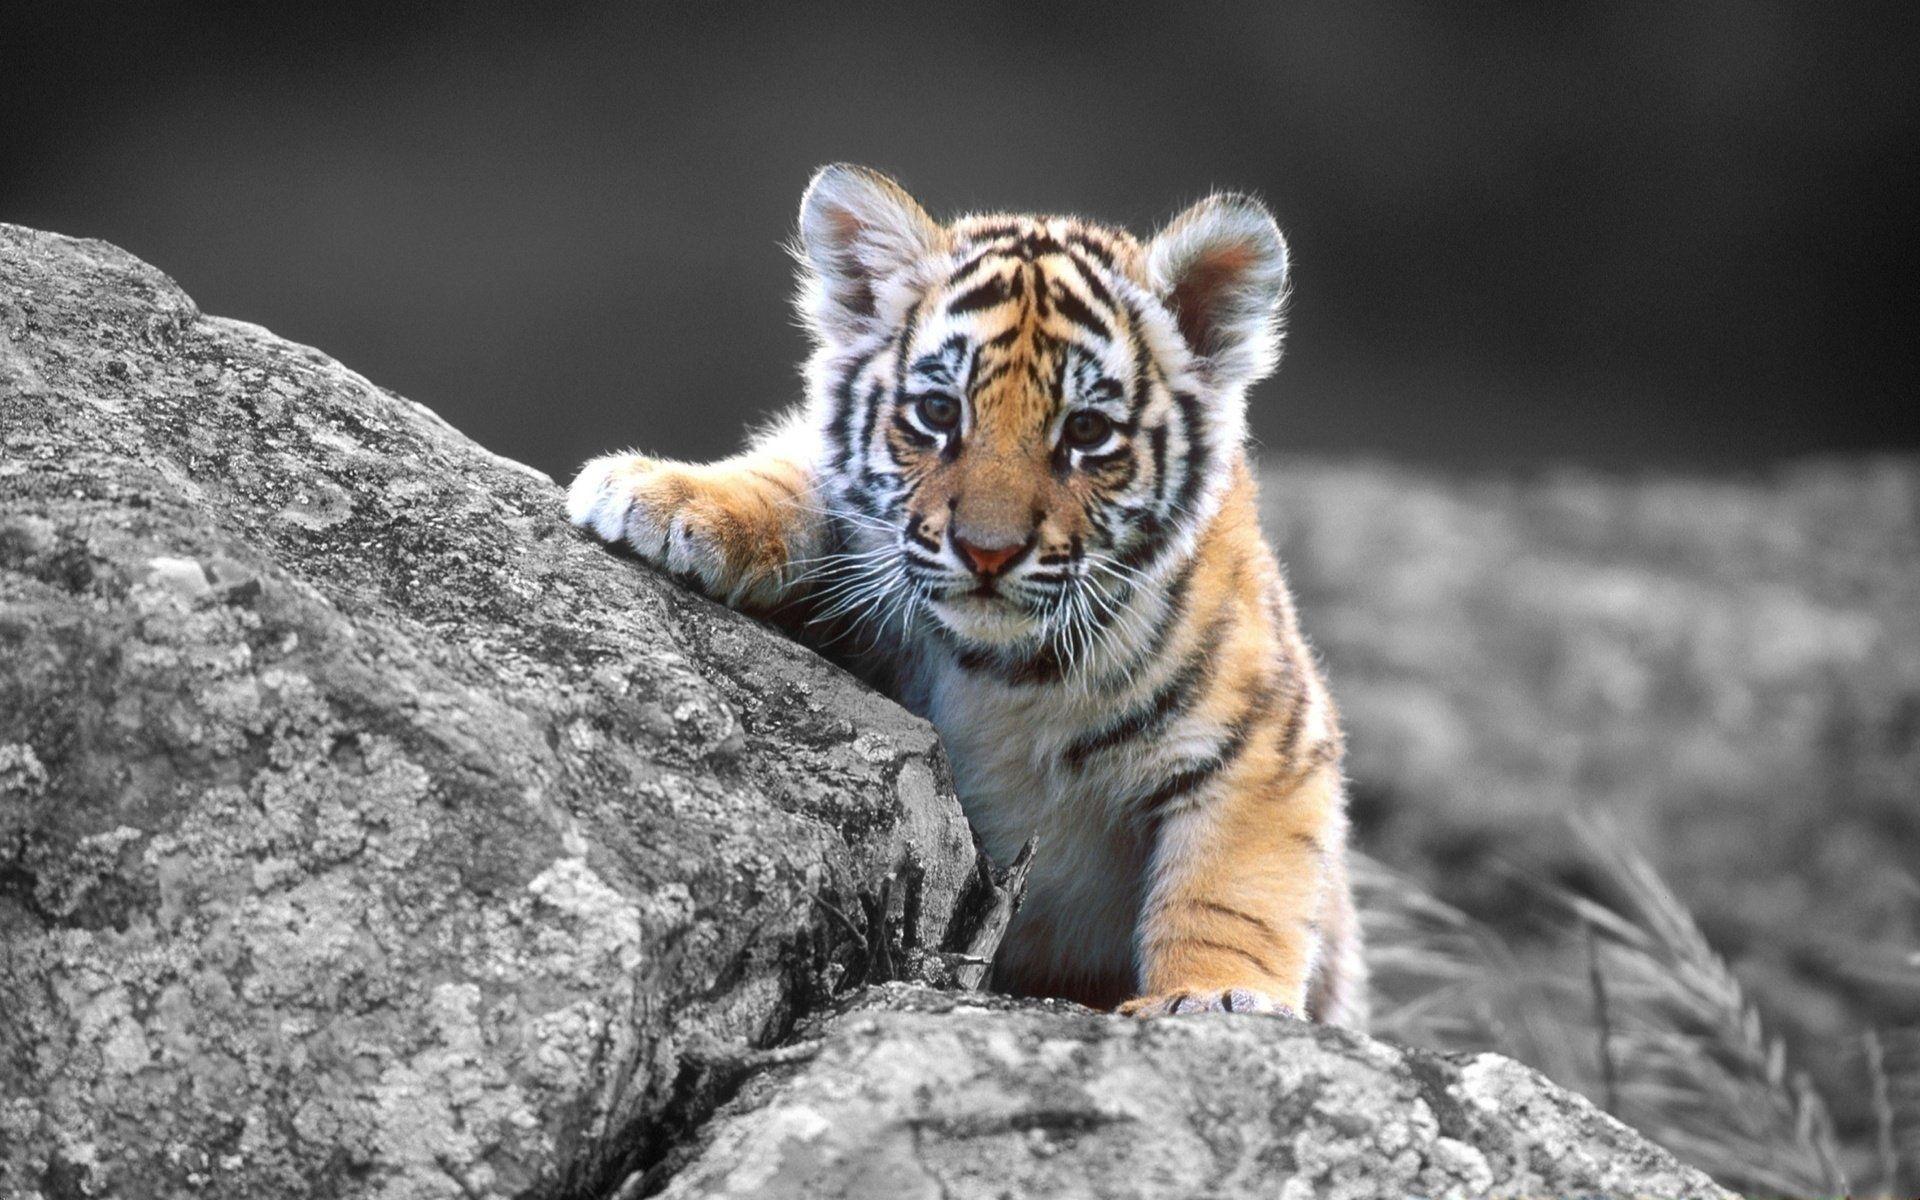 Baby Tiger Wallpapers Wallpaper Cave